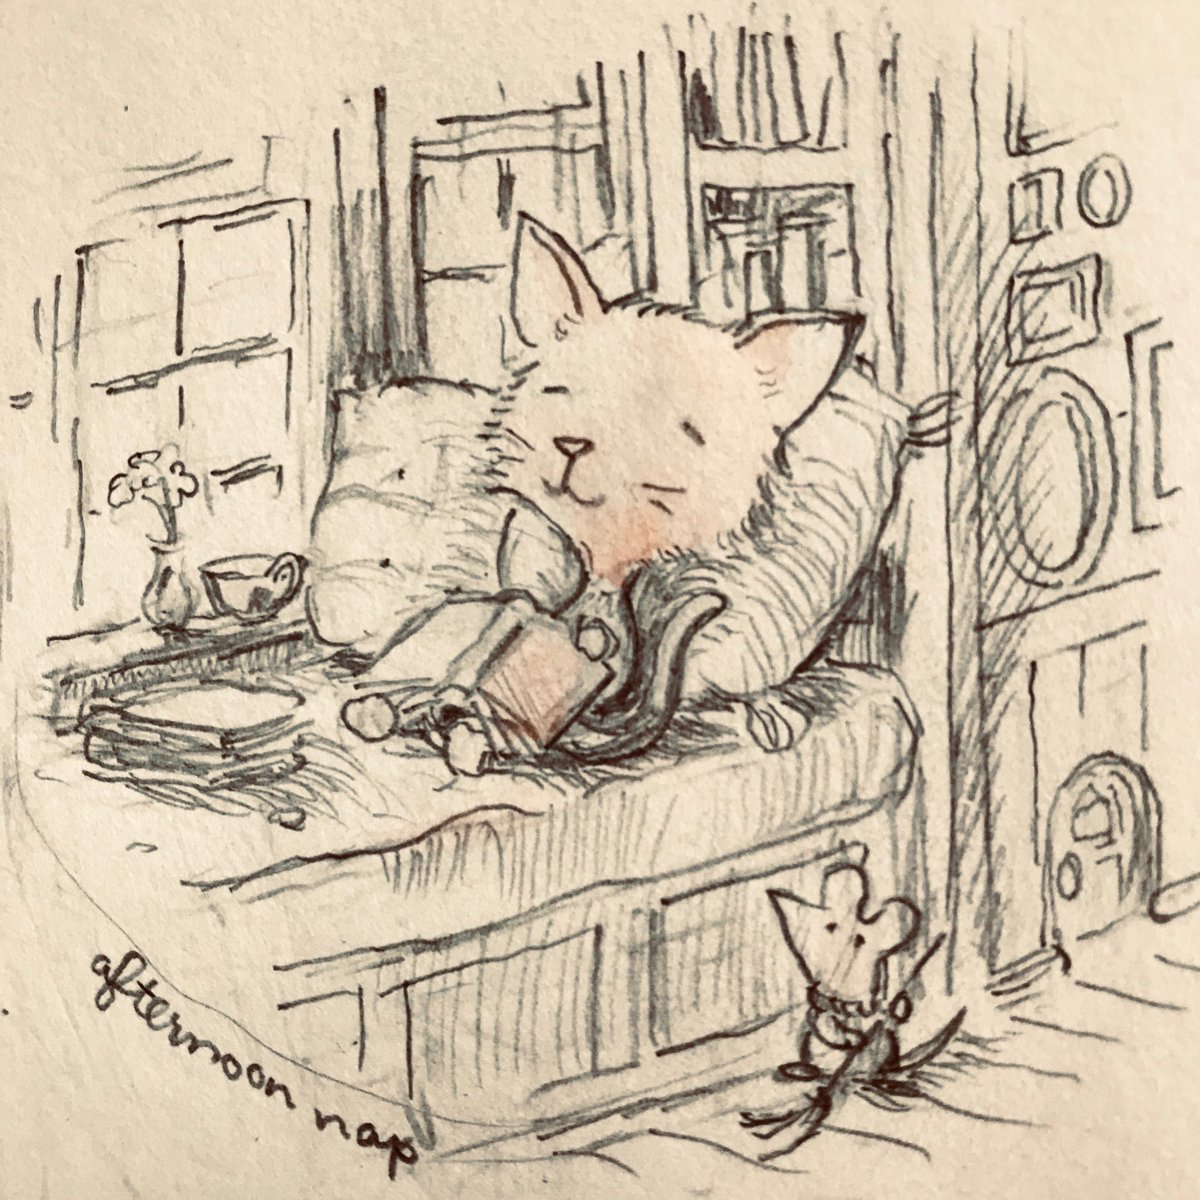 Reading time in the afternoon 😄🌷📚
#cat #cats #kitten #mouse  #cozy #reading #books #window #afternoon #drawing #sketch #cuteproducts #zazzle
zazzle.com/peabop